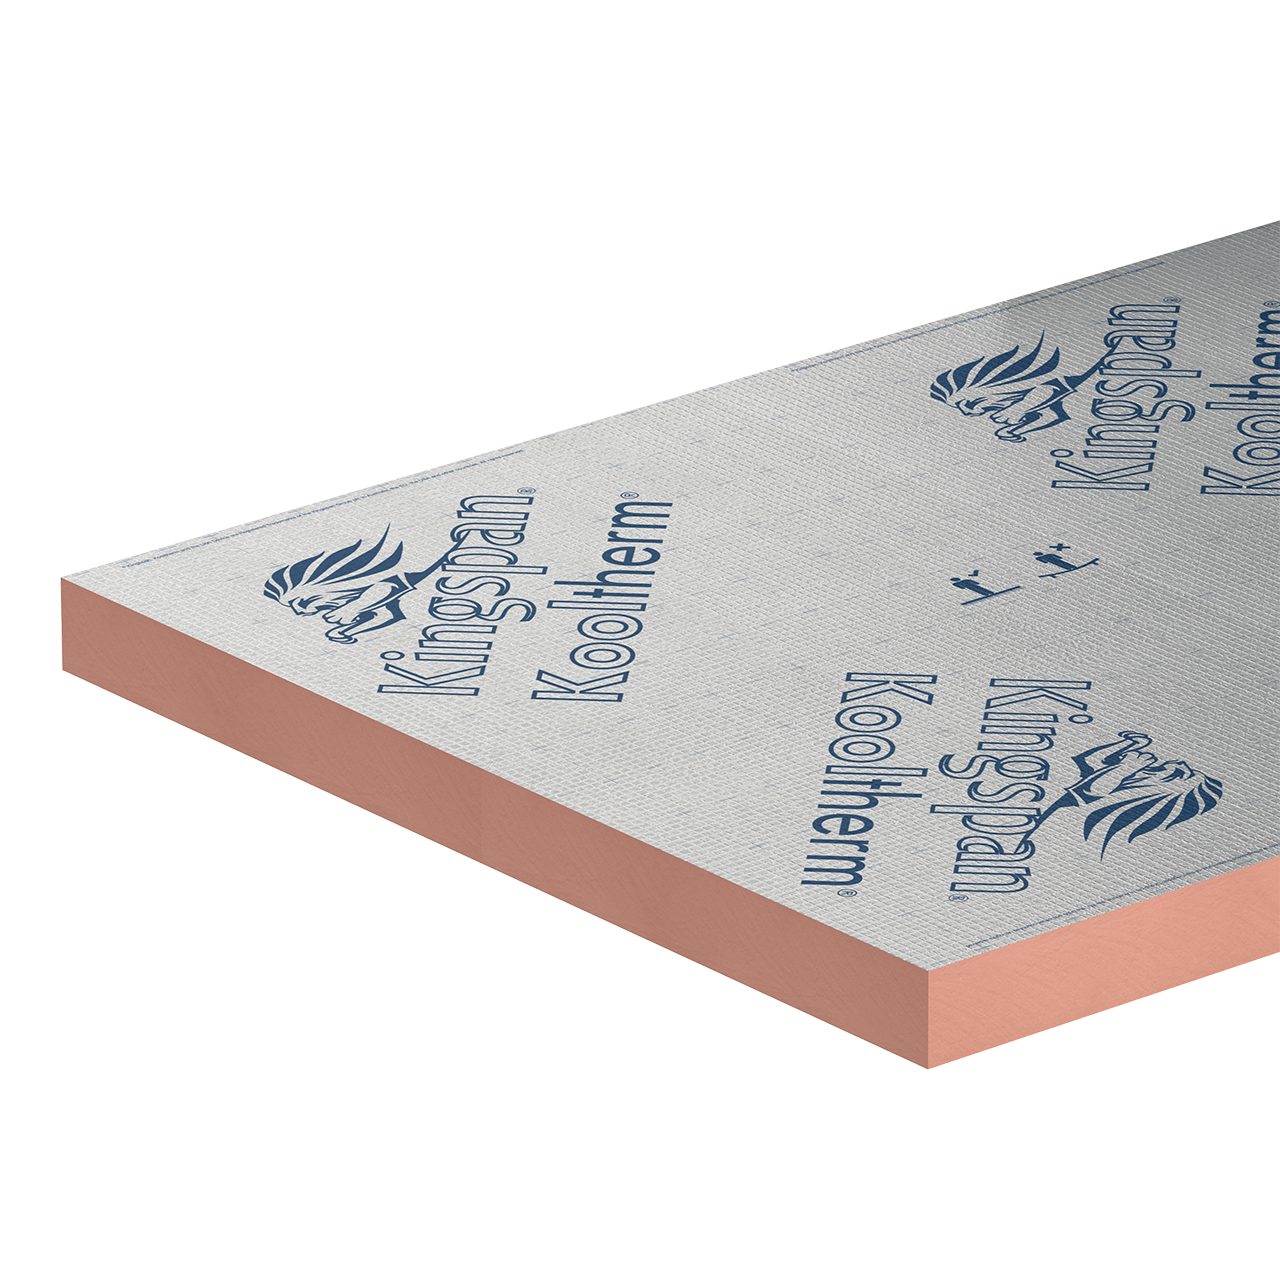 Metal Building Insulation Panels: Which Type to Choose?<br/> — Rmax